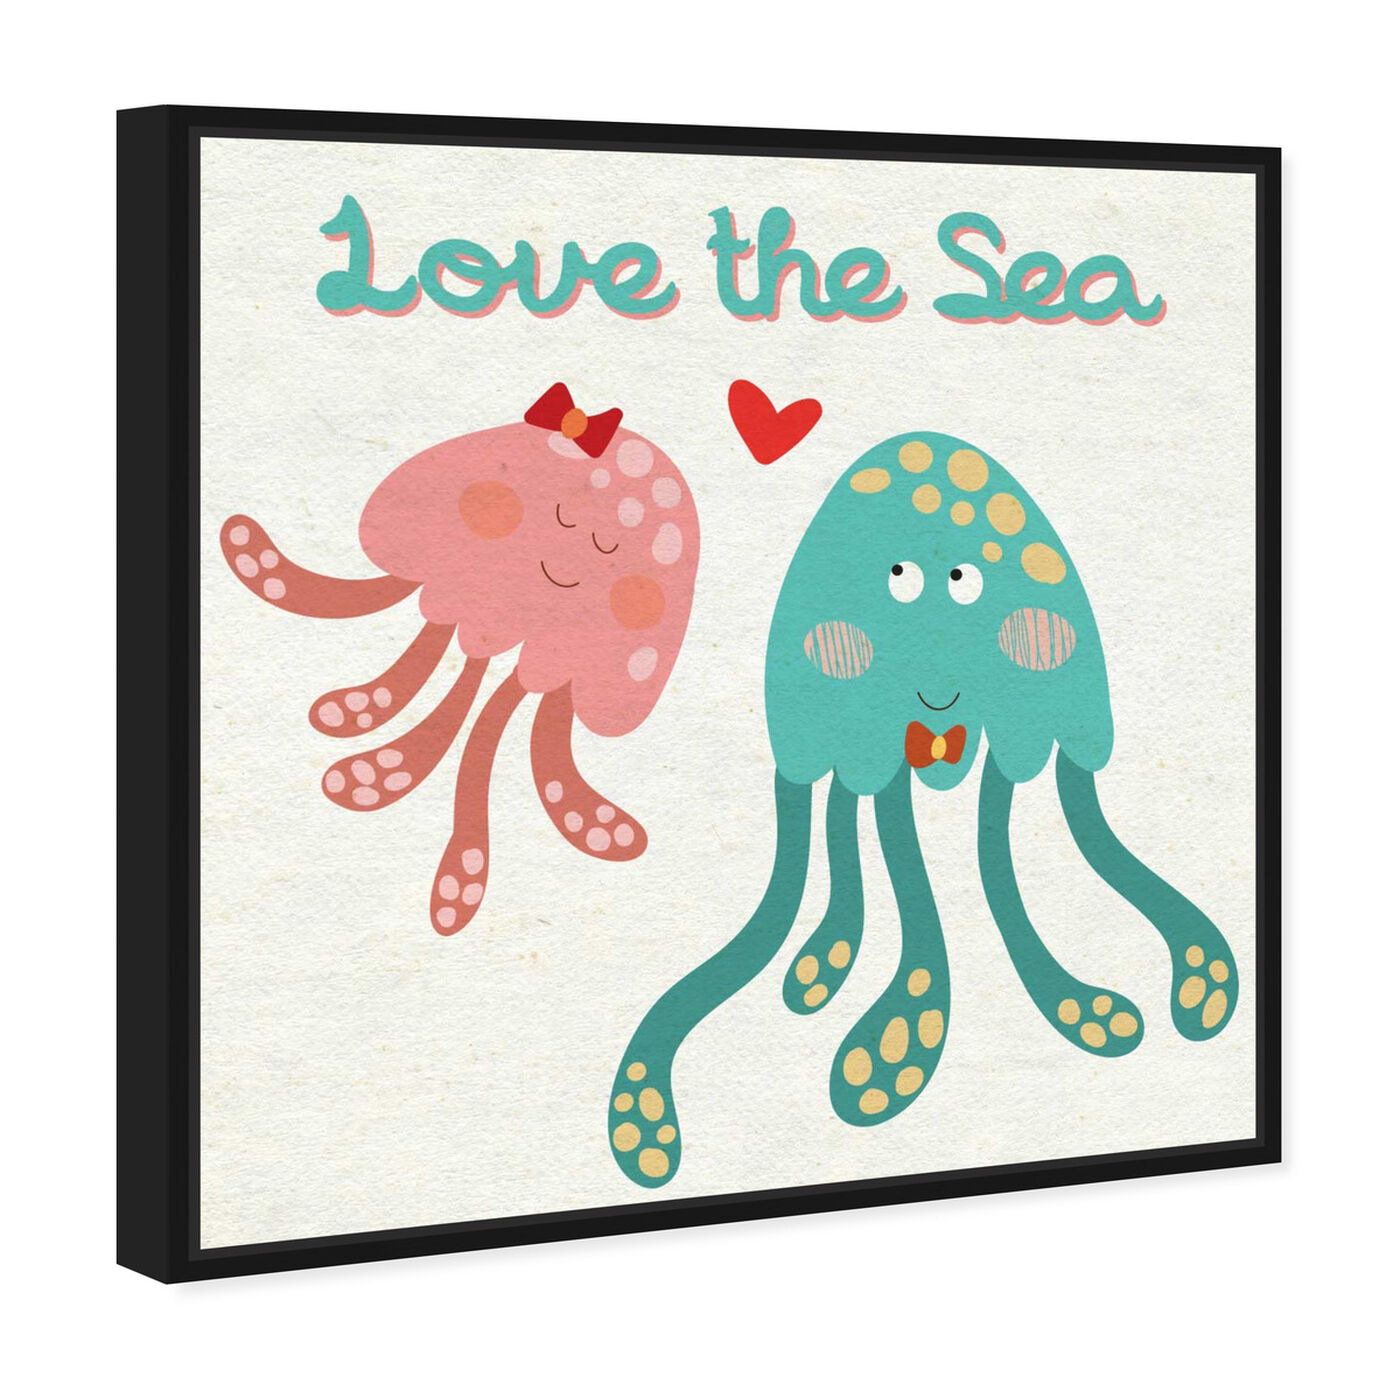 Angled view of Love the Sea featuring animals and sea animals art.